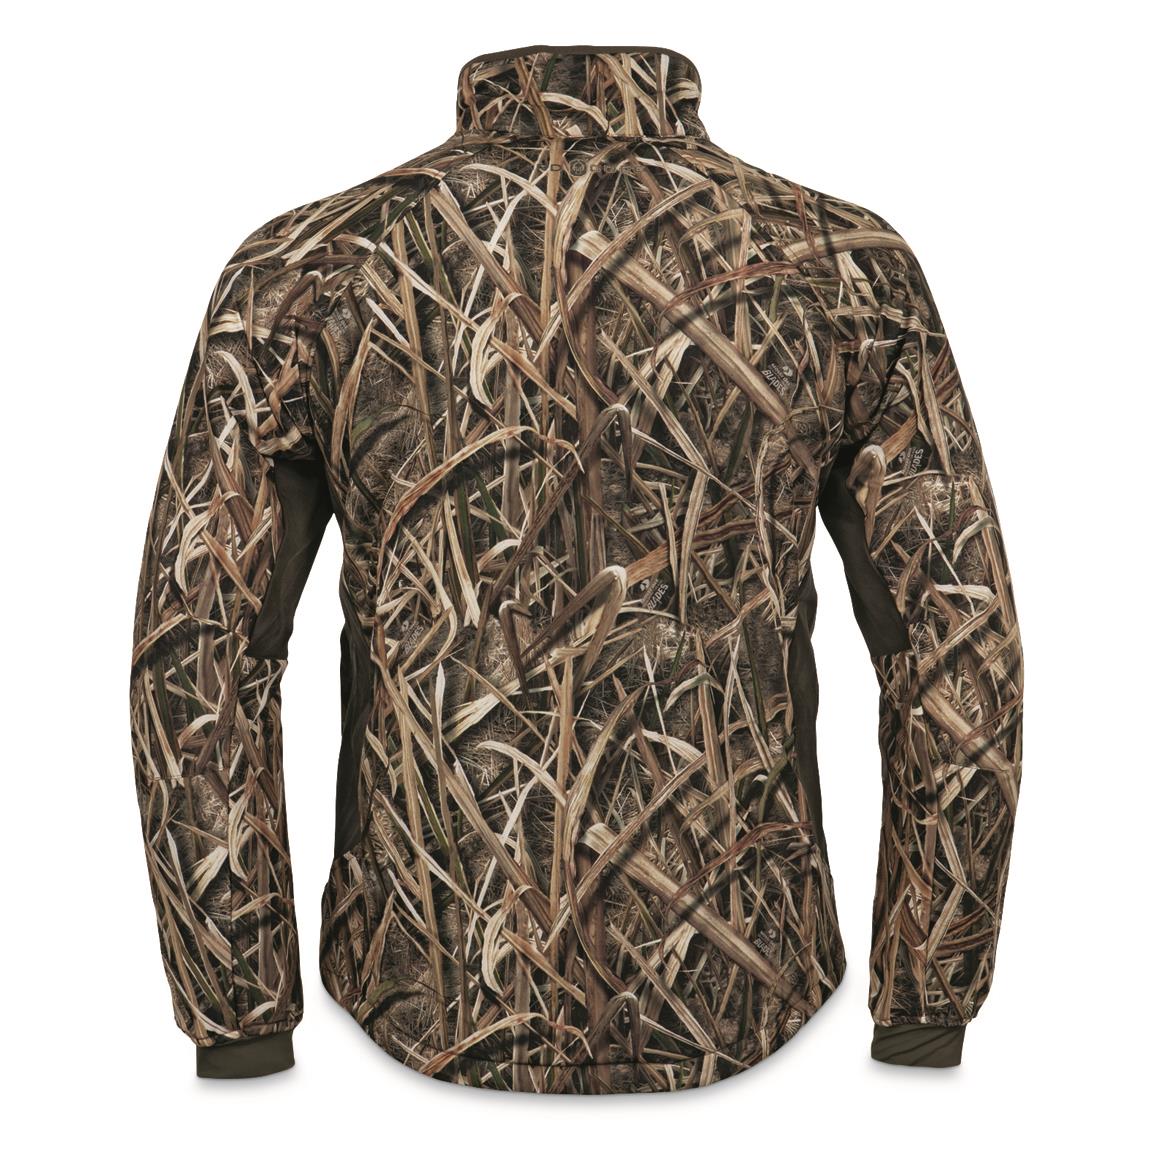 UNDER ARMOUR Men's Hunting Clothing 